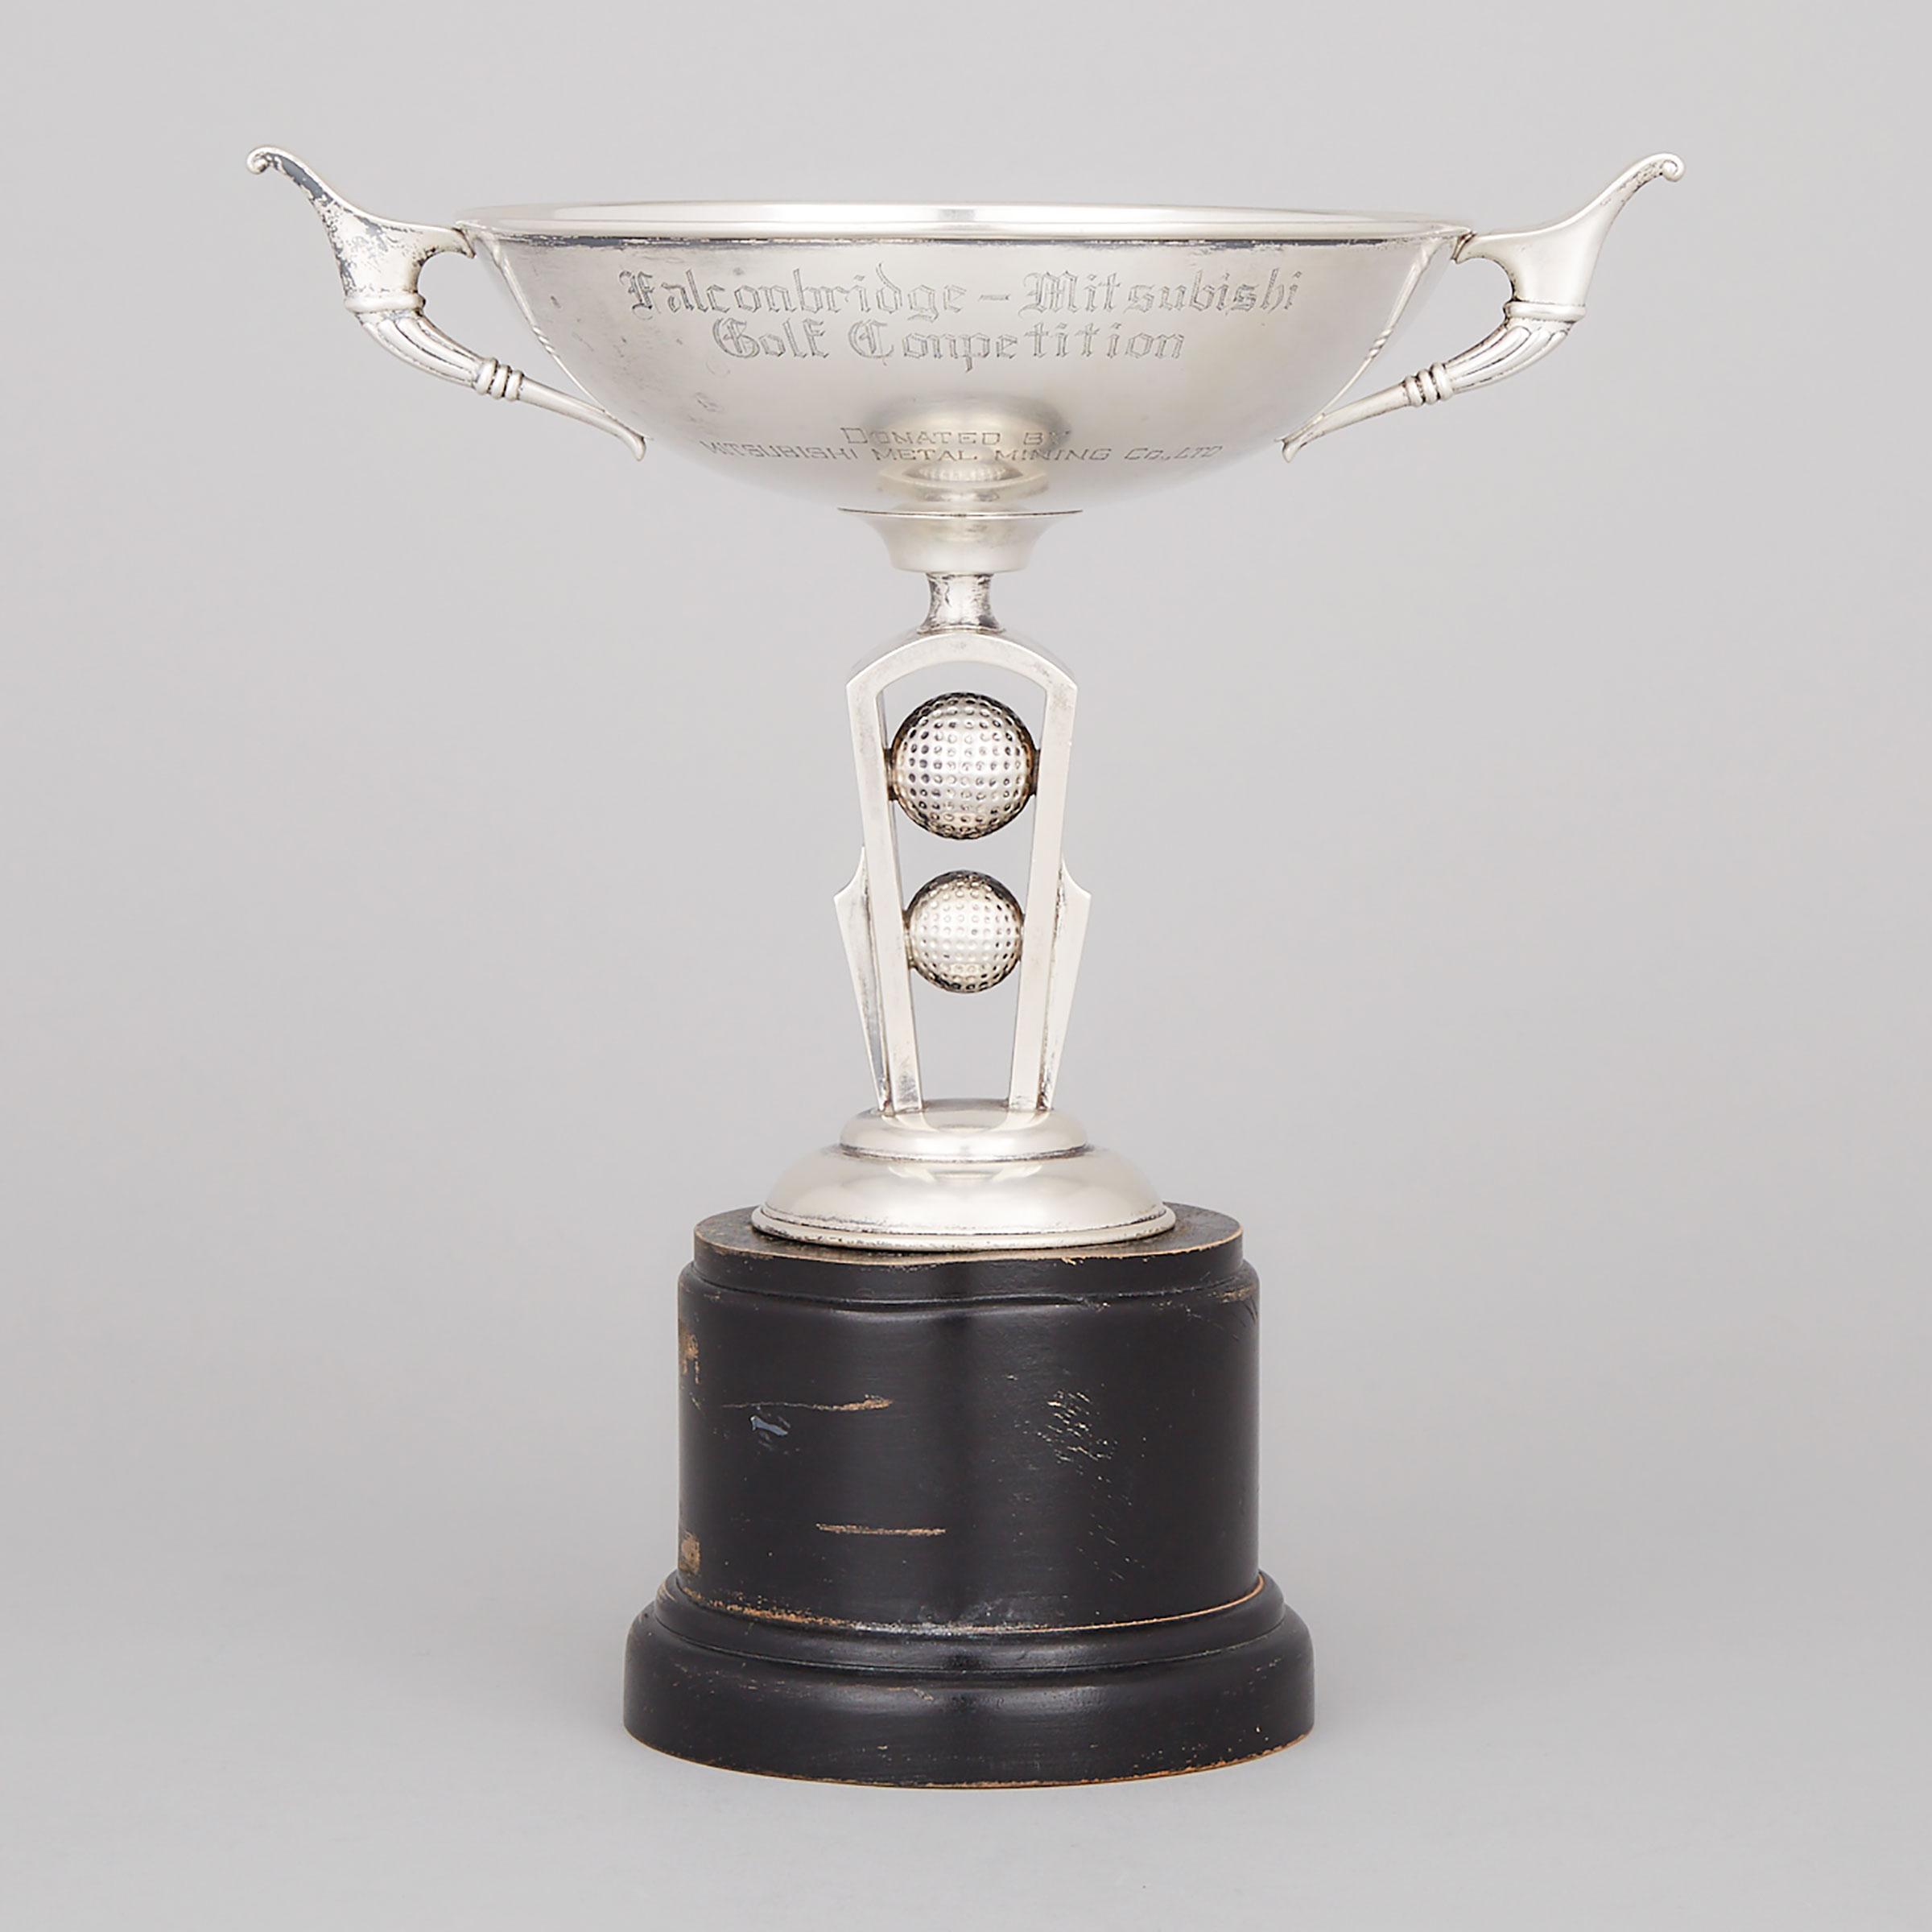 Japanese Silver Trophy Cup, 20th century